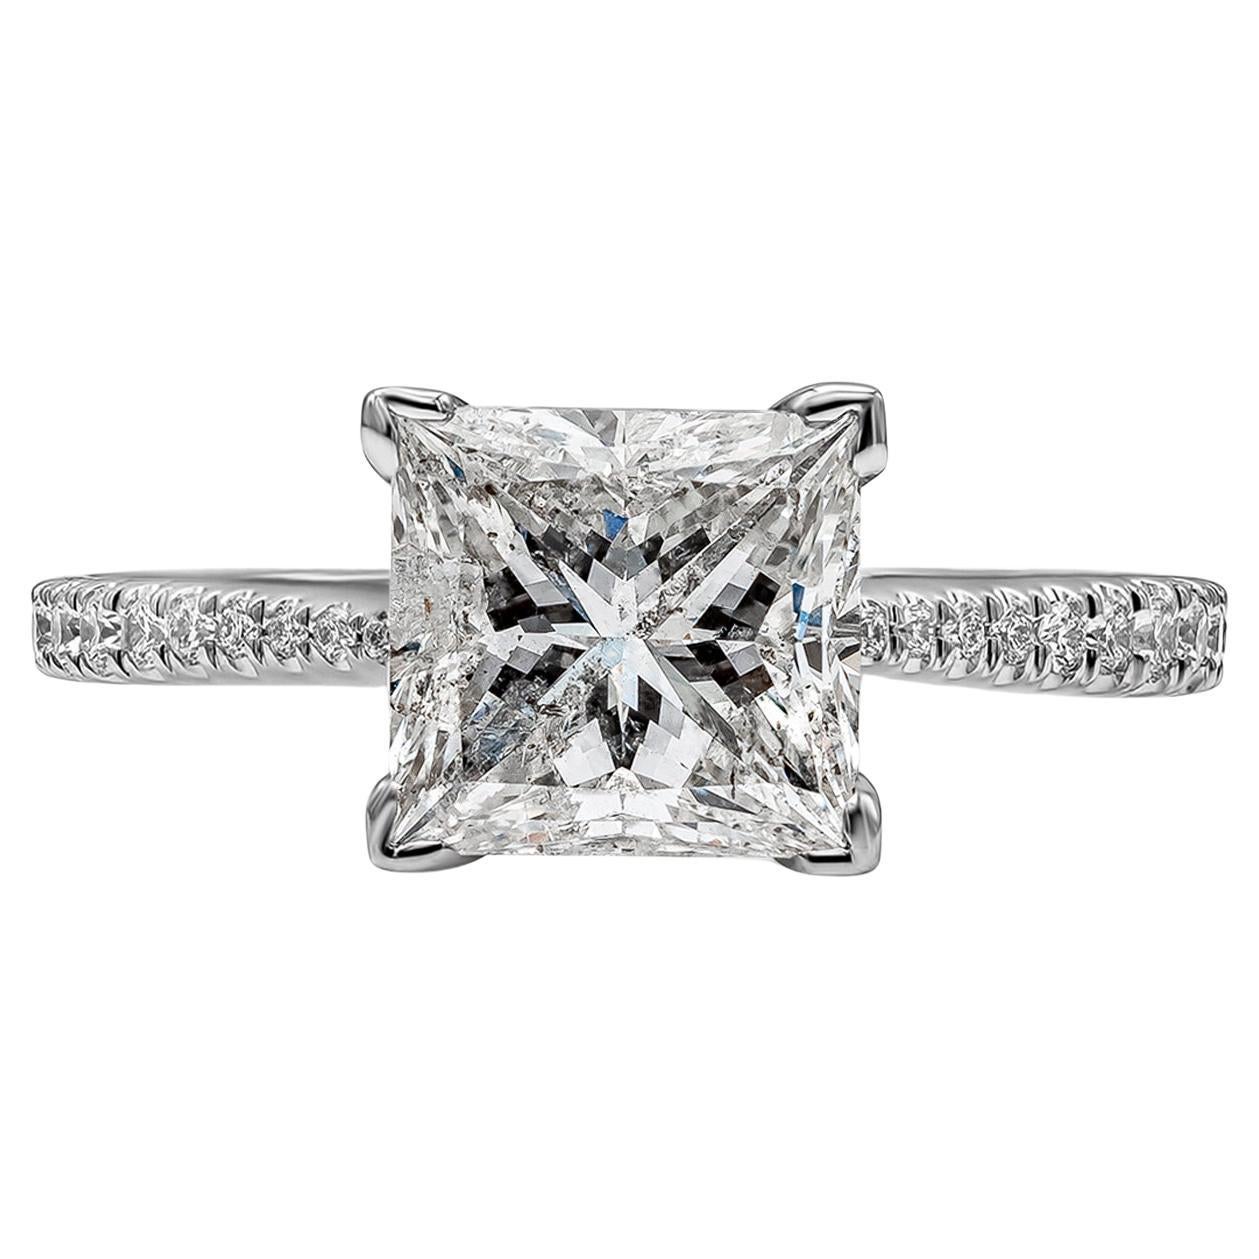 EGL Certified 2.03 Carats Princess Cut Diamond Engagement Ring with Side Stones